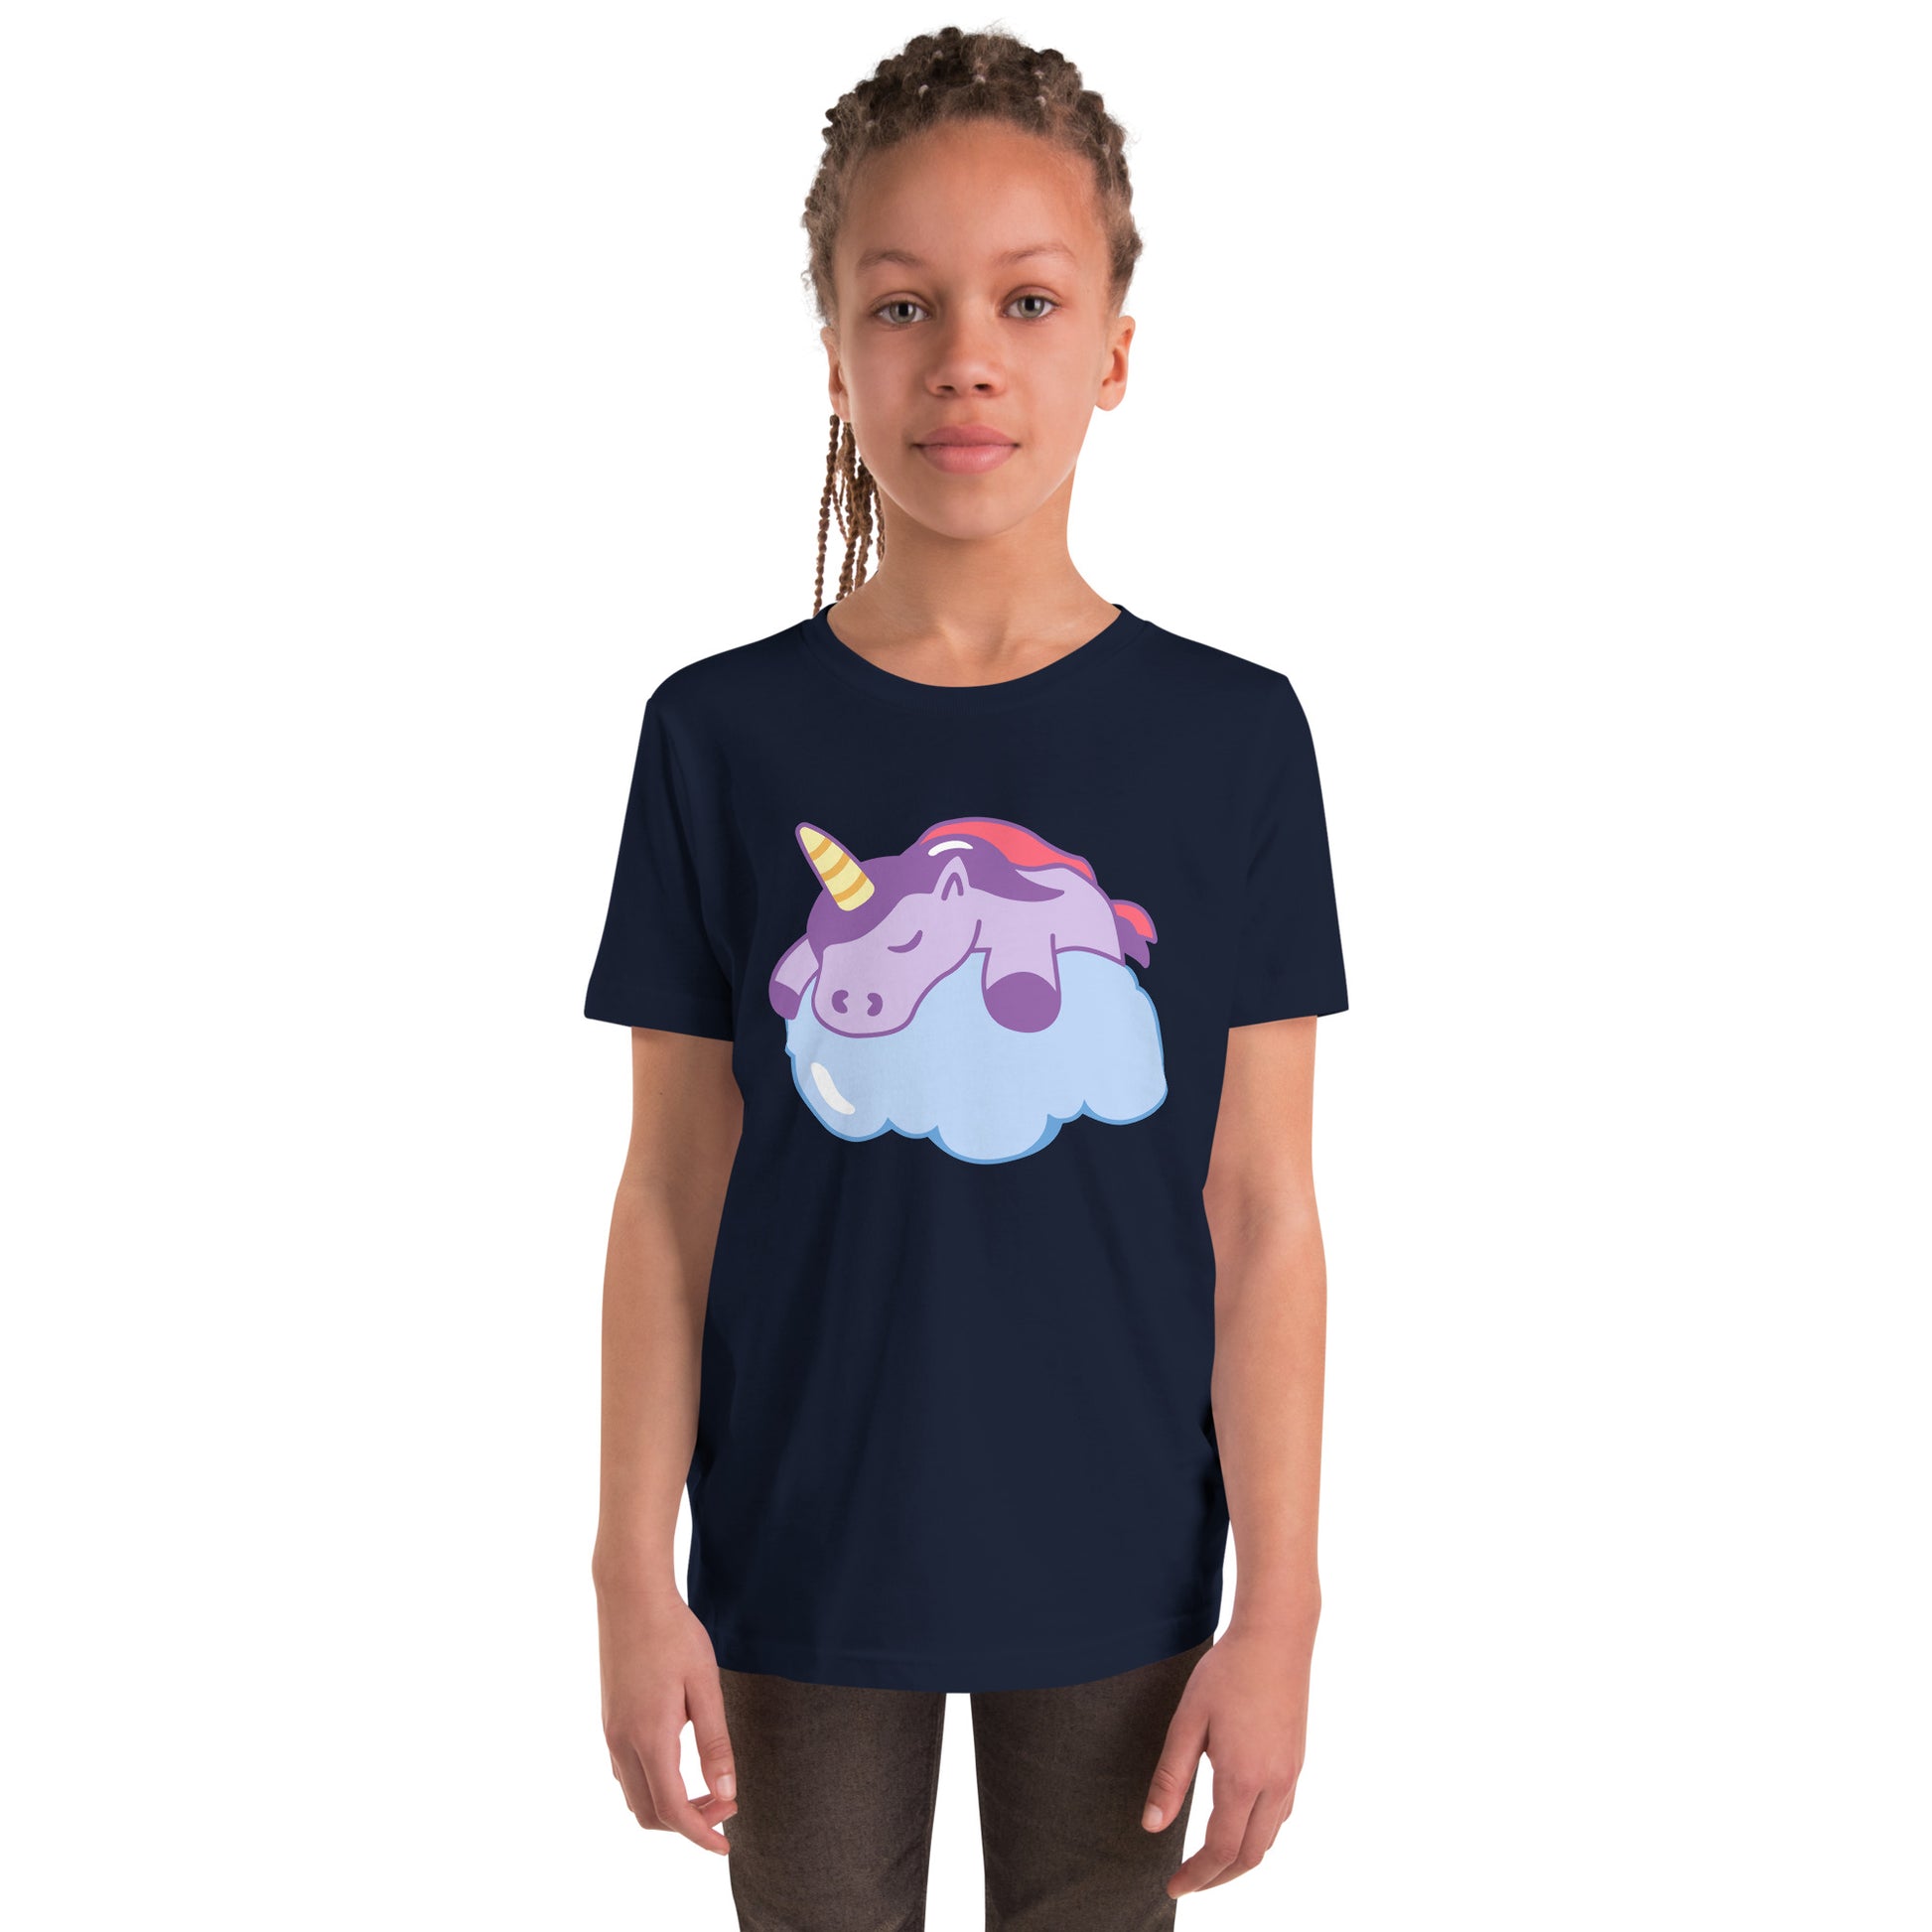 Youth with a navy T-shirt with a print of a sleeping unicorn on a cloud